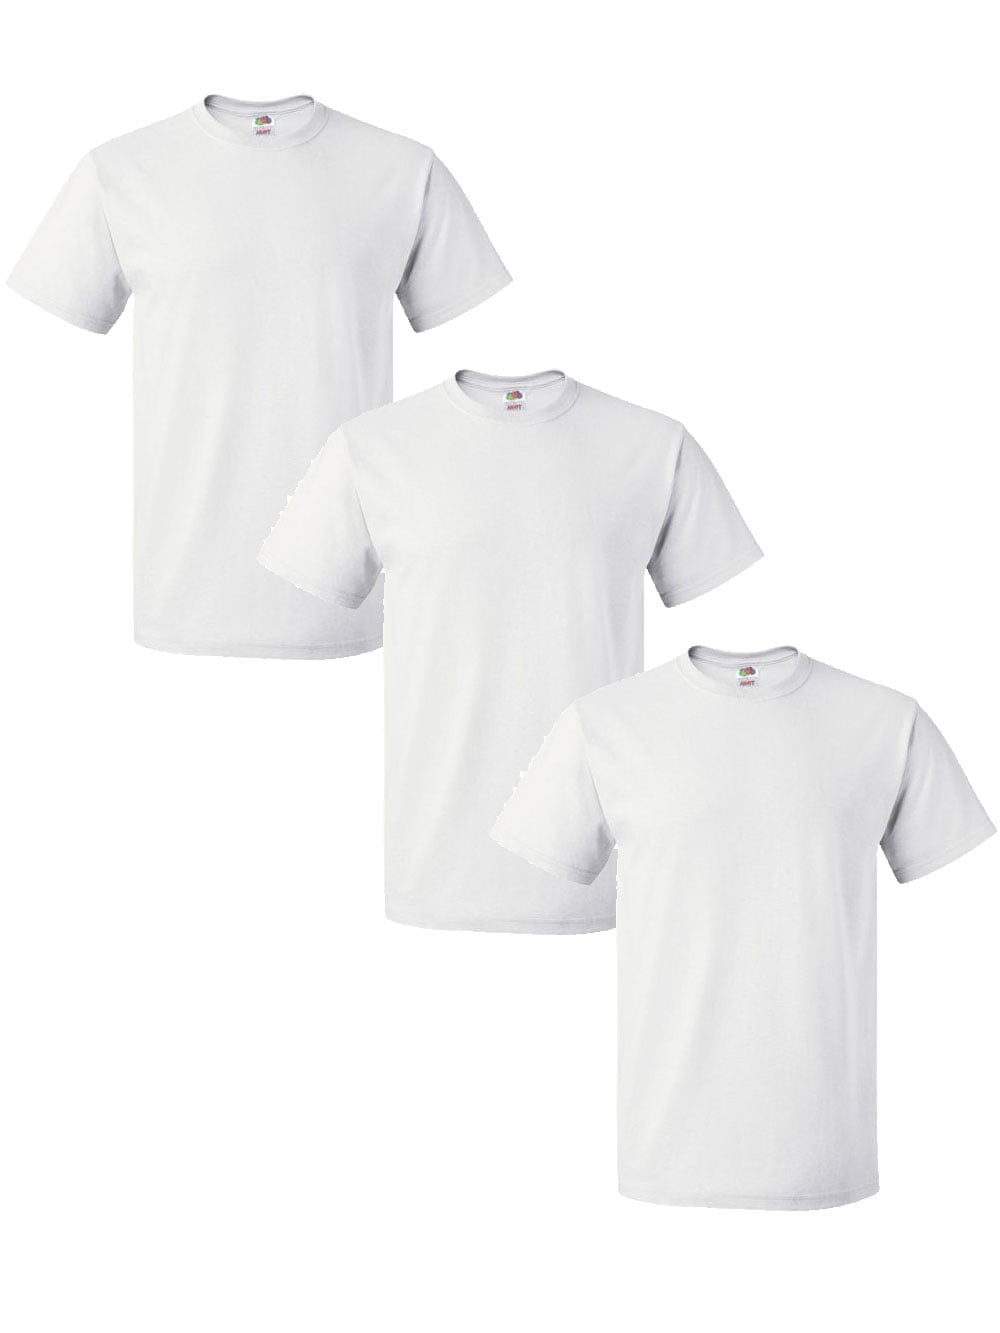 3 PACK - Fruit Of The Loom - Men's 100% Cotton T-Shirt (White, Small ...